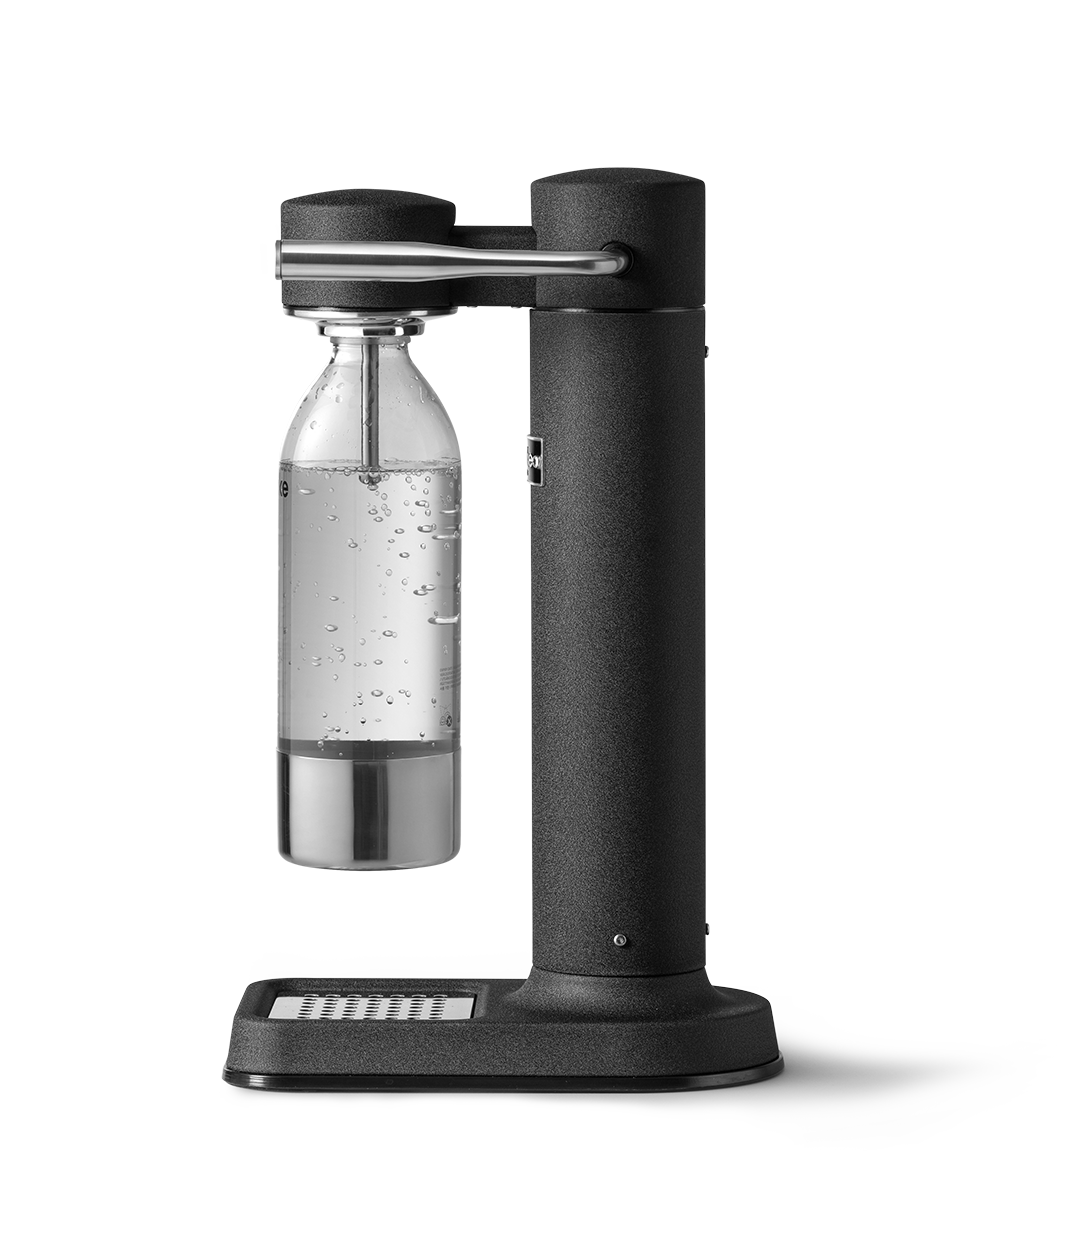 Aarke Carbonator 3 in Matte Black. Side view with PET bottle attached.